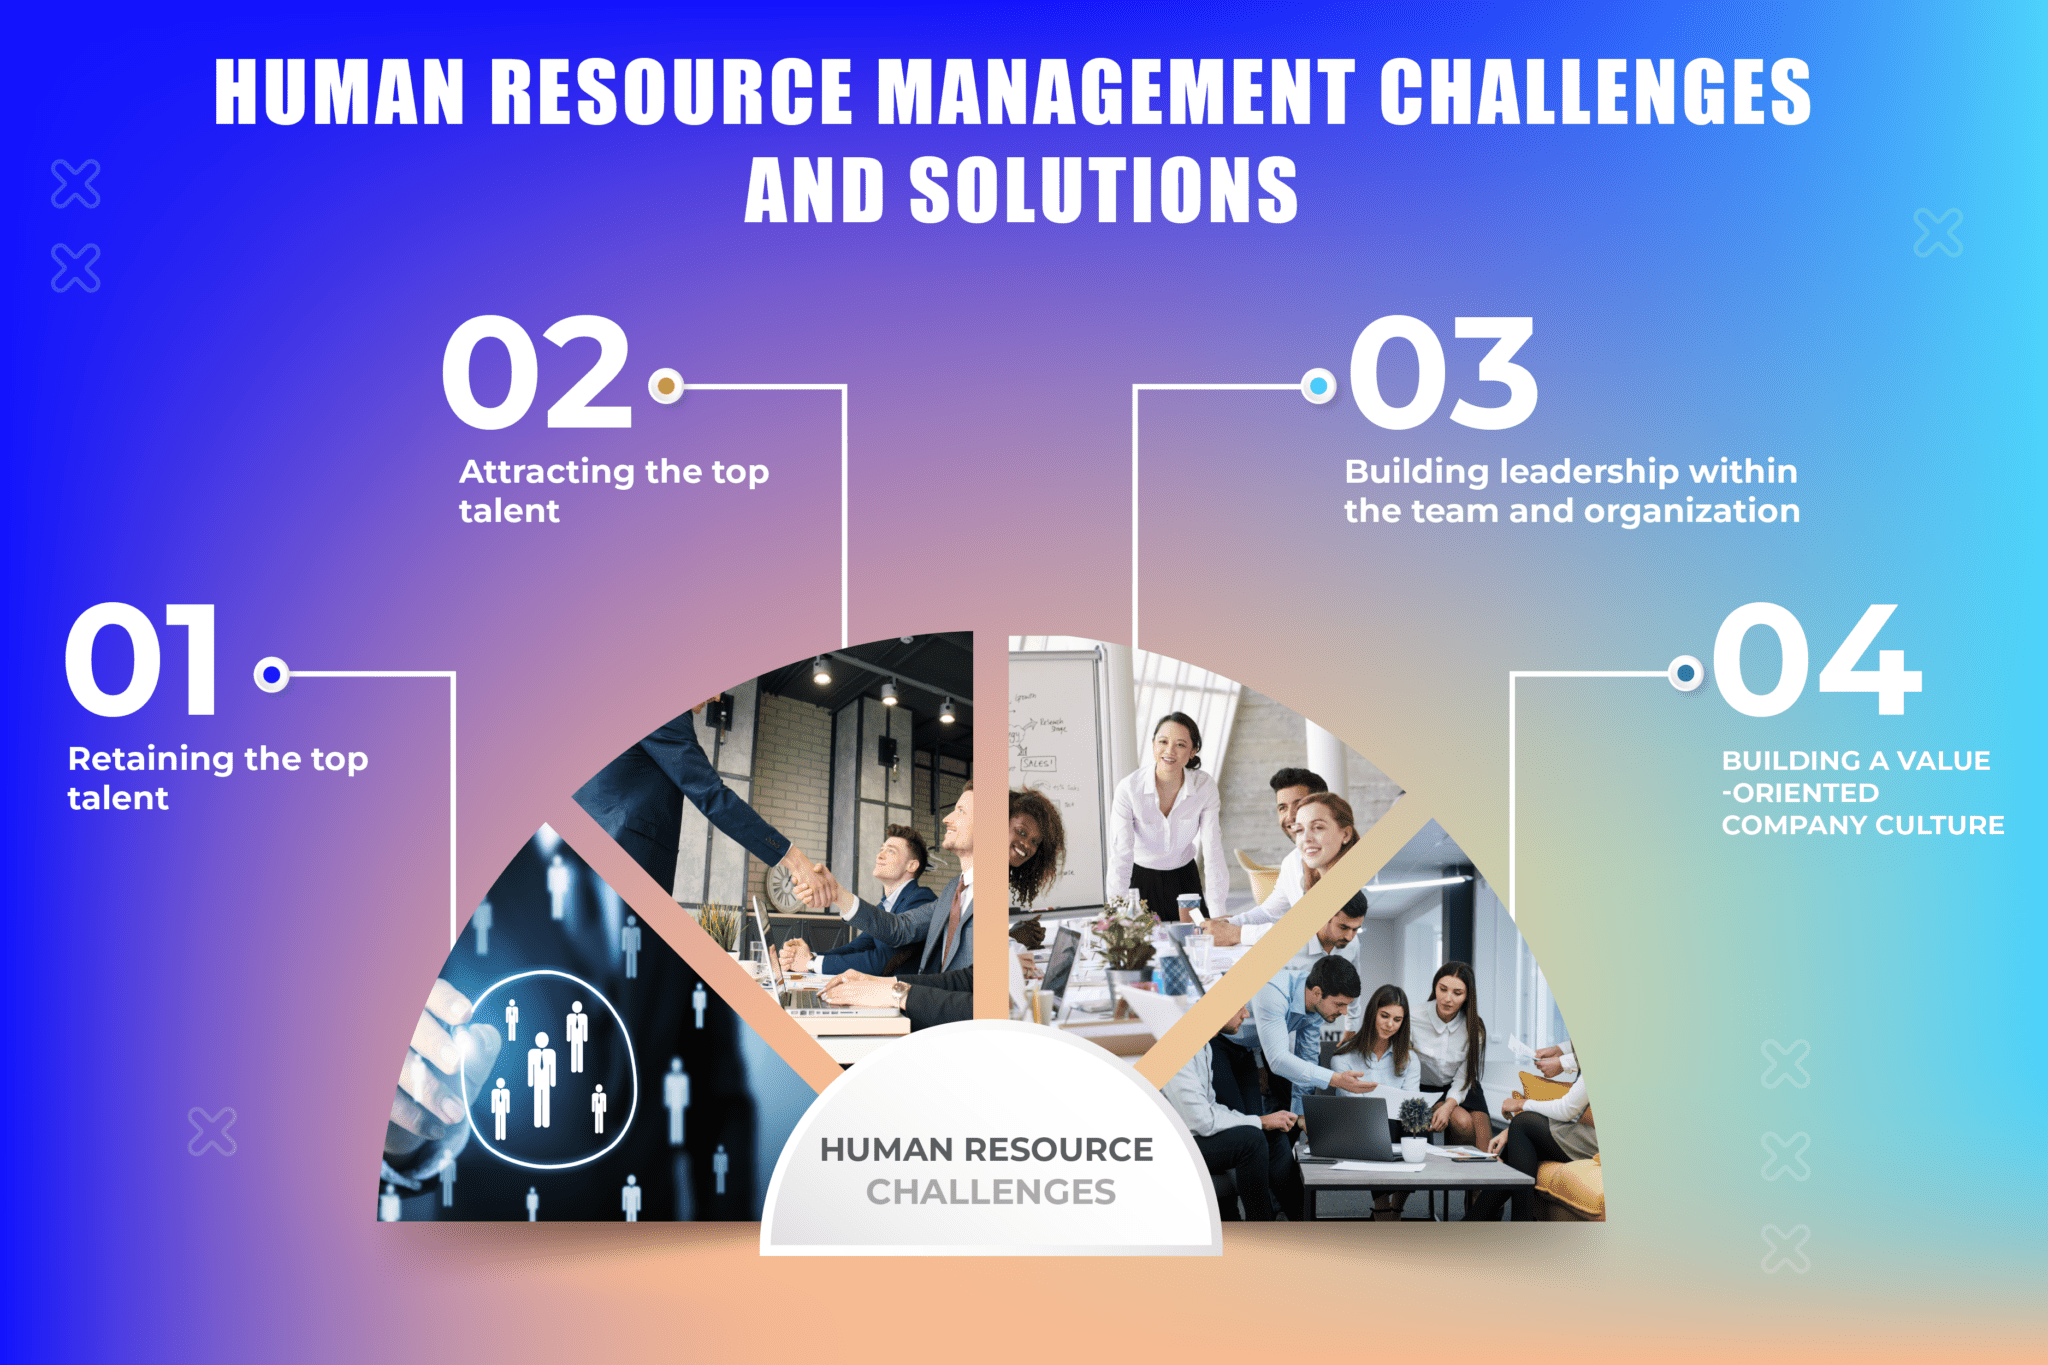 Human Resource Management Challenges and Solutions